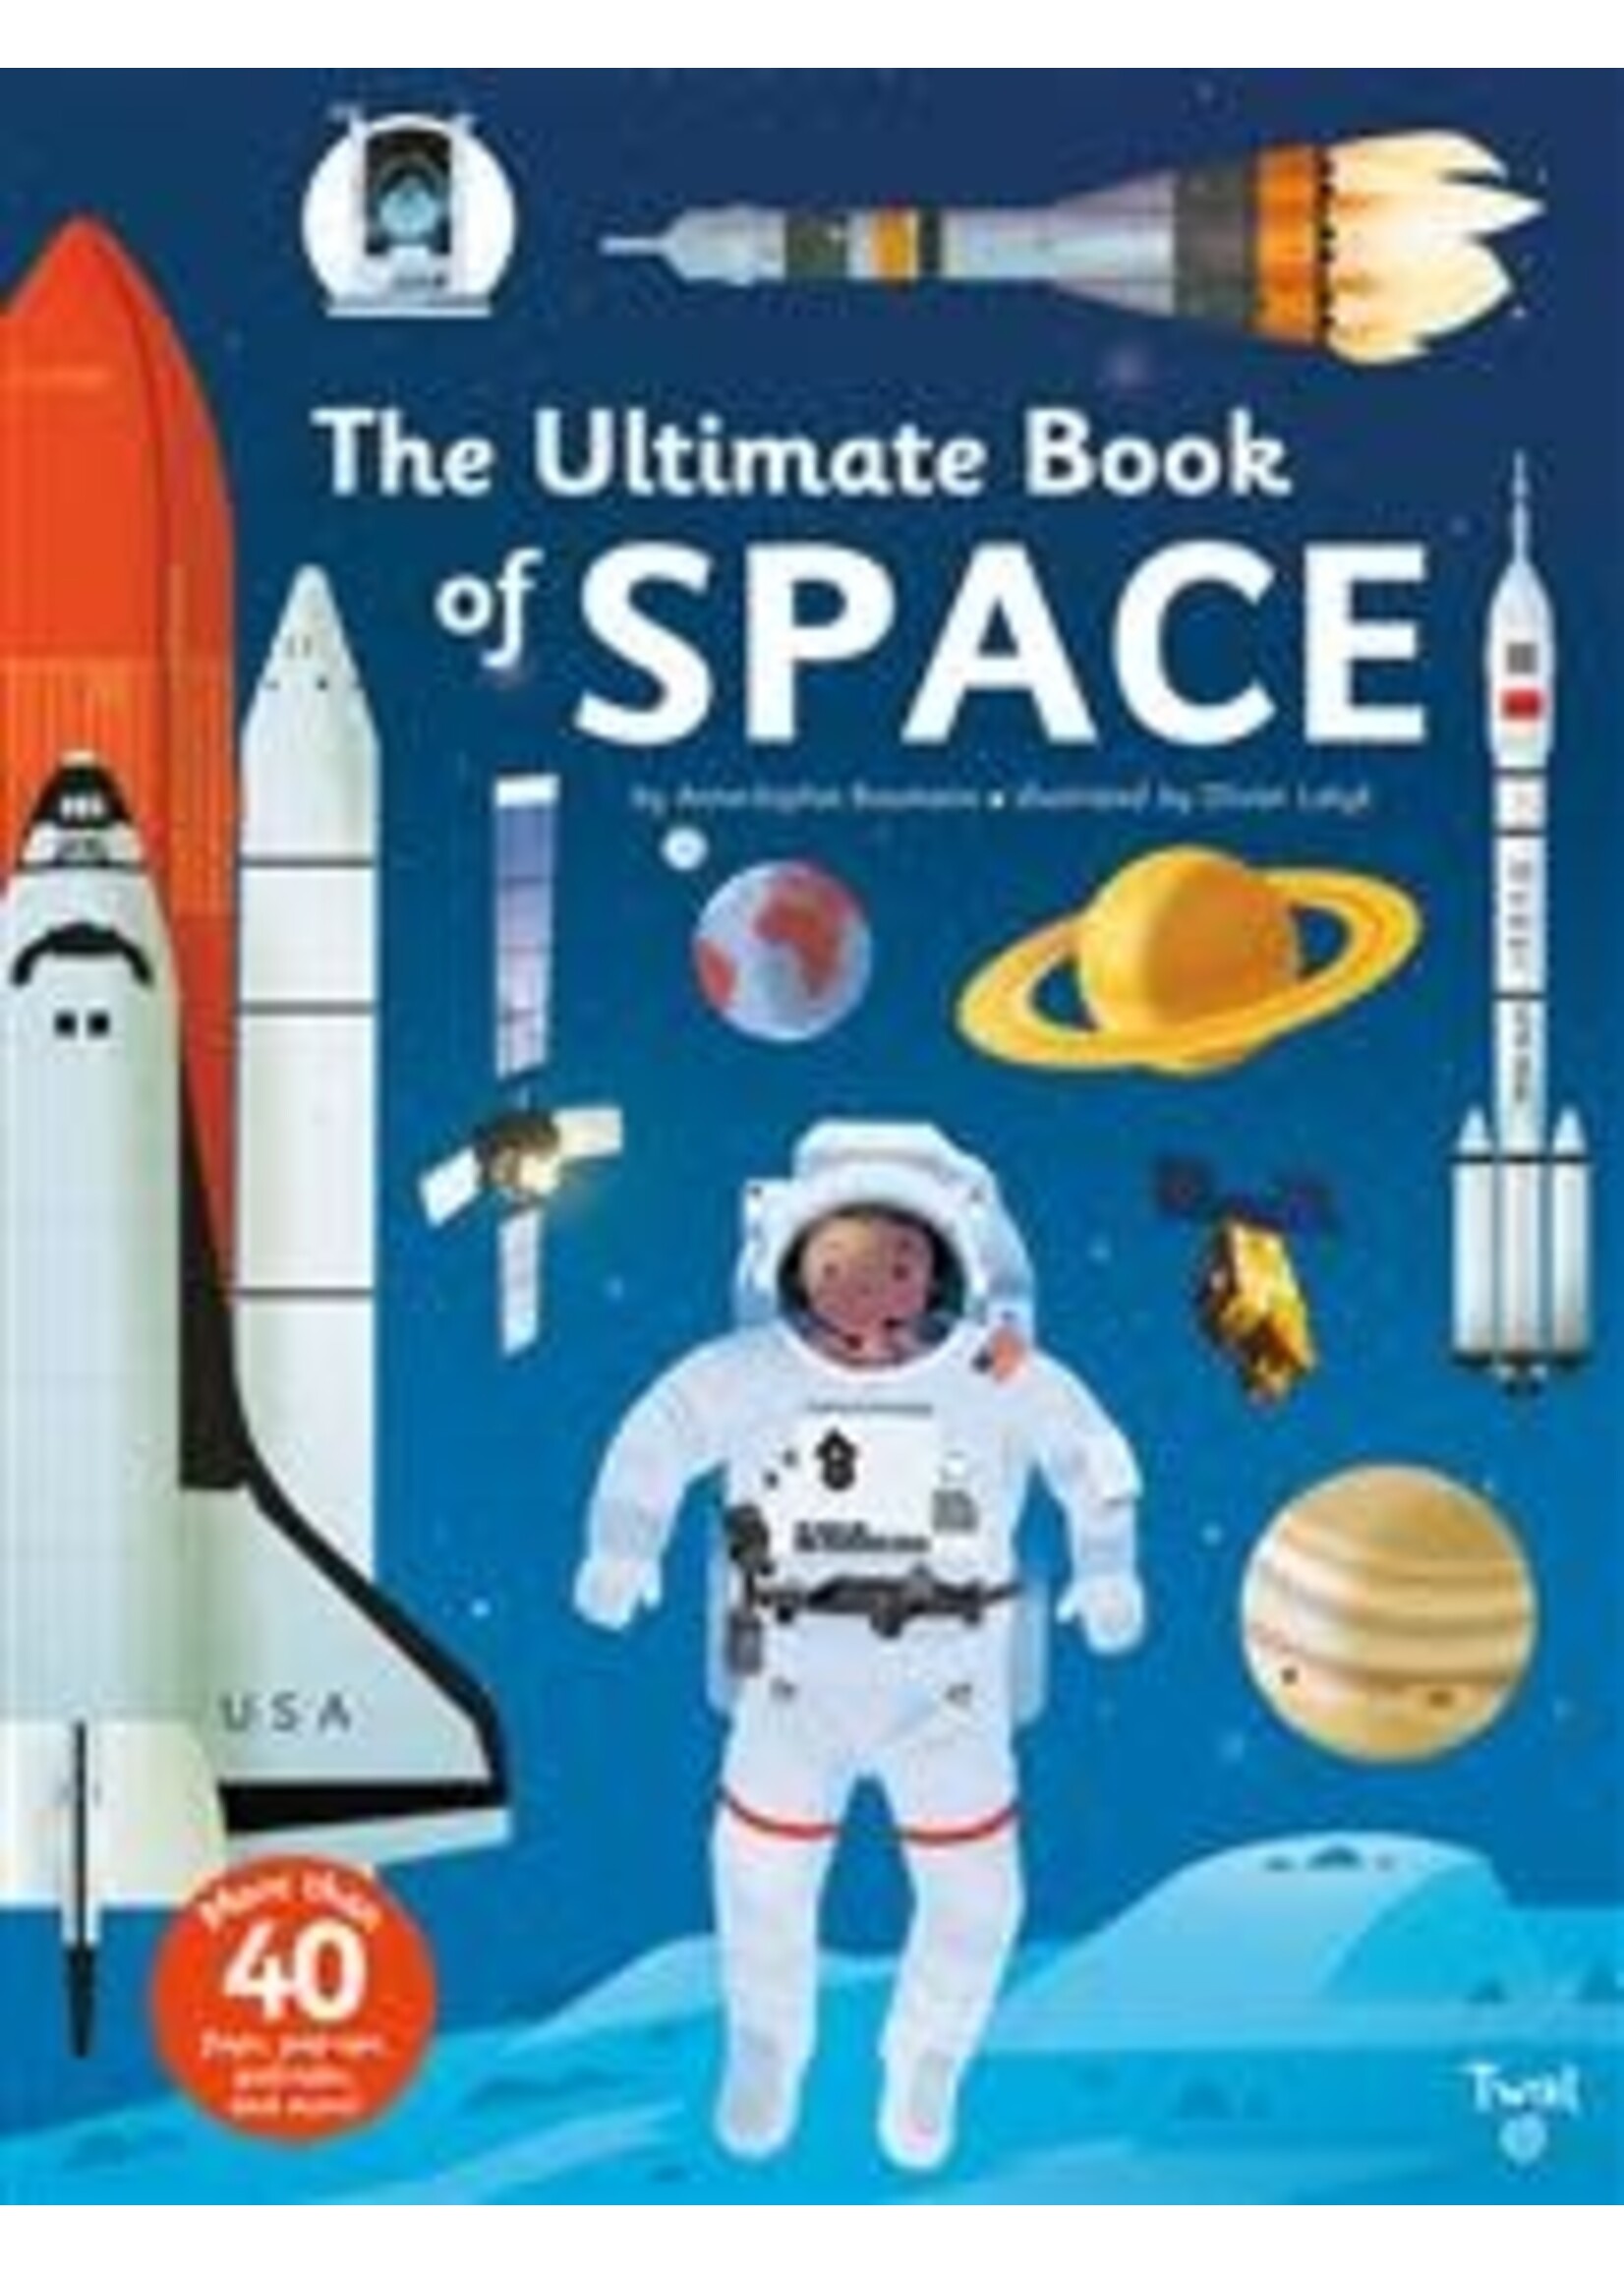 The Ultimate Book of Space by Anne-Sophie Baumann, Olivier Latyck